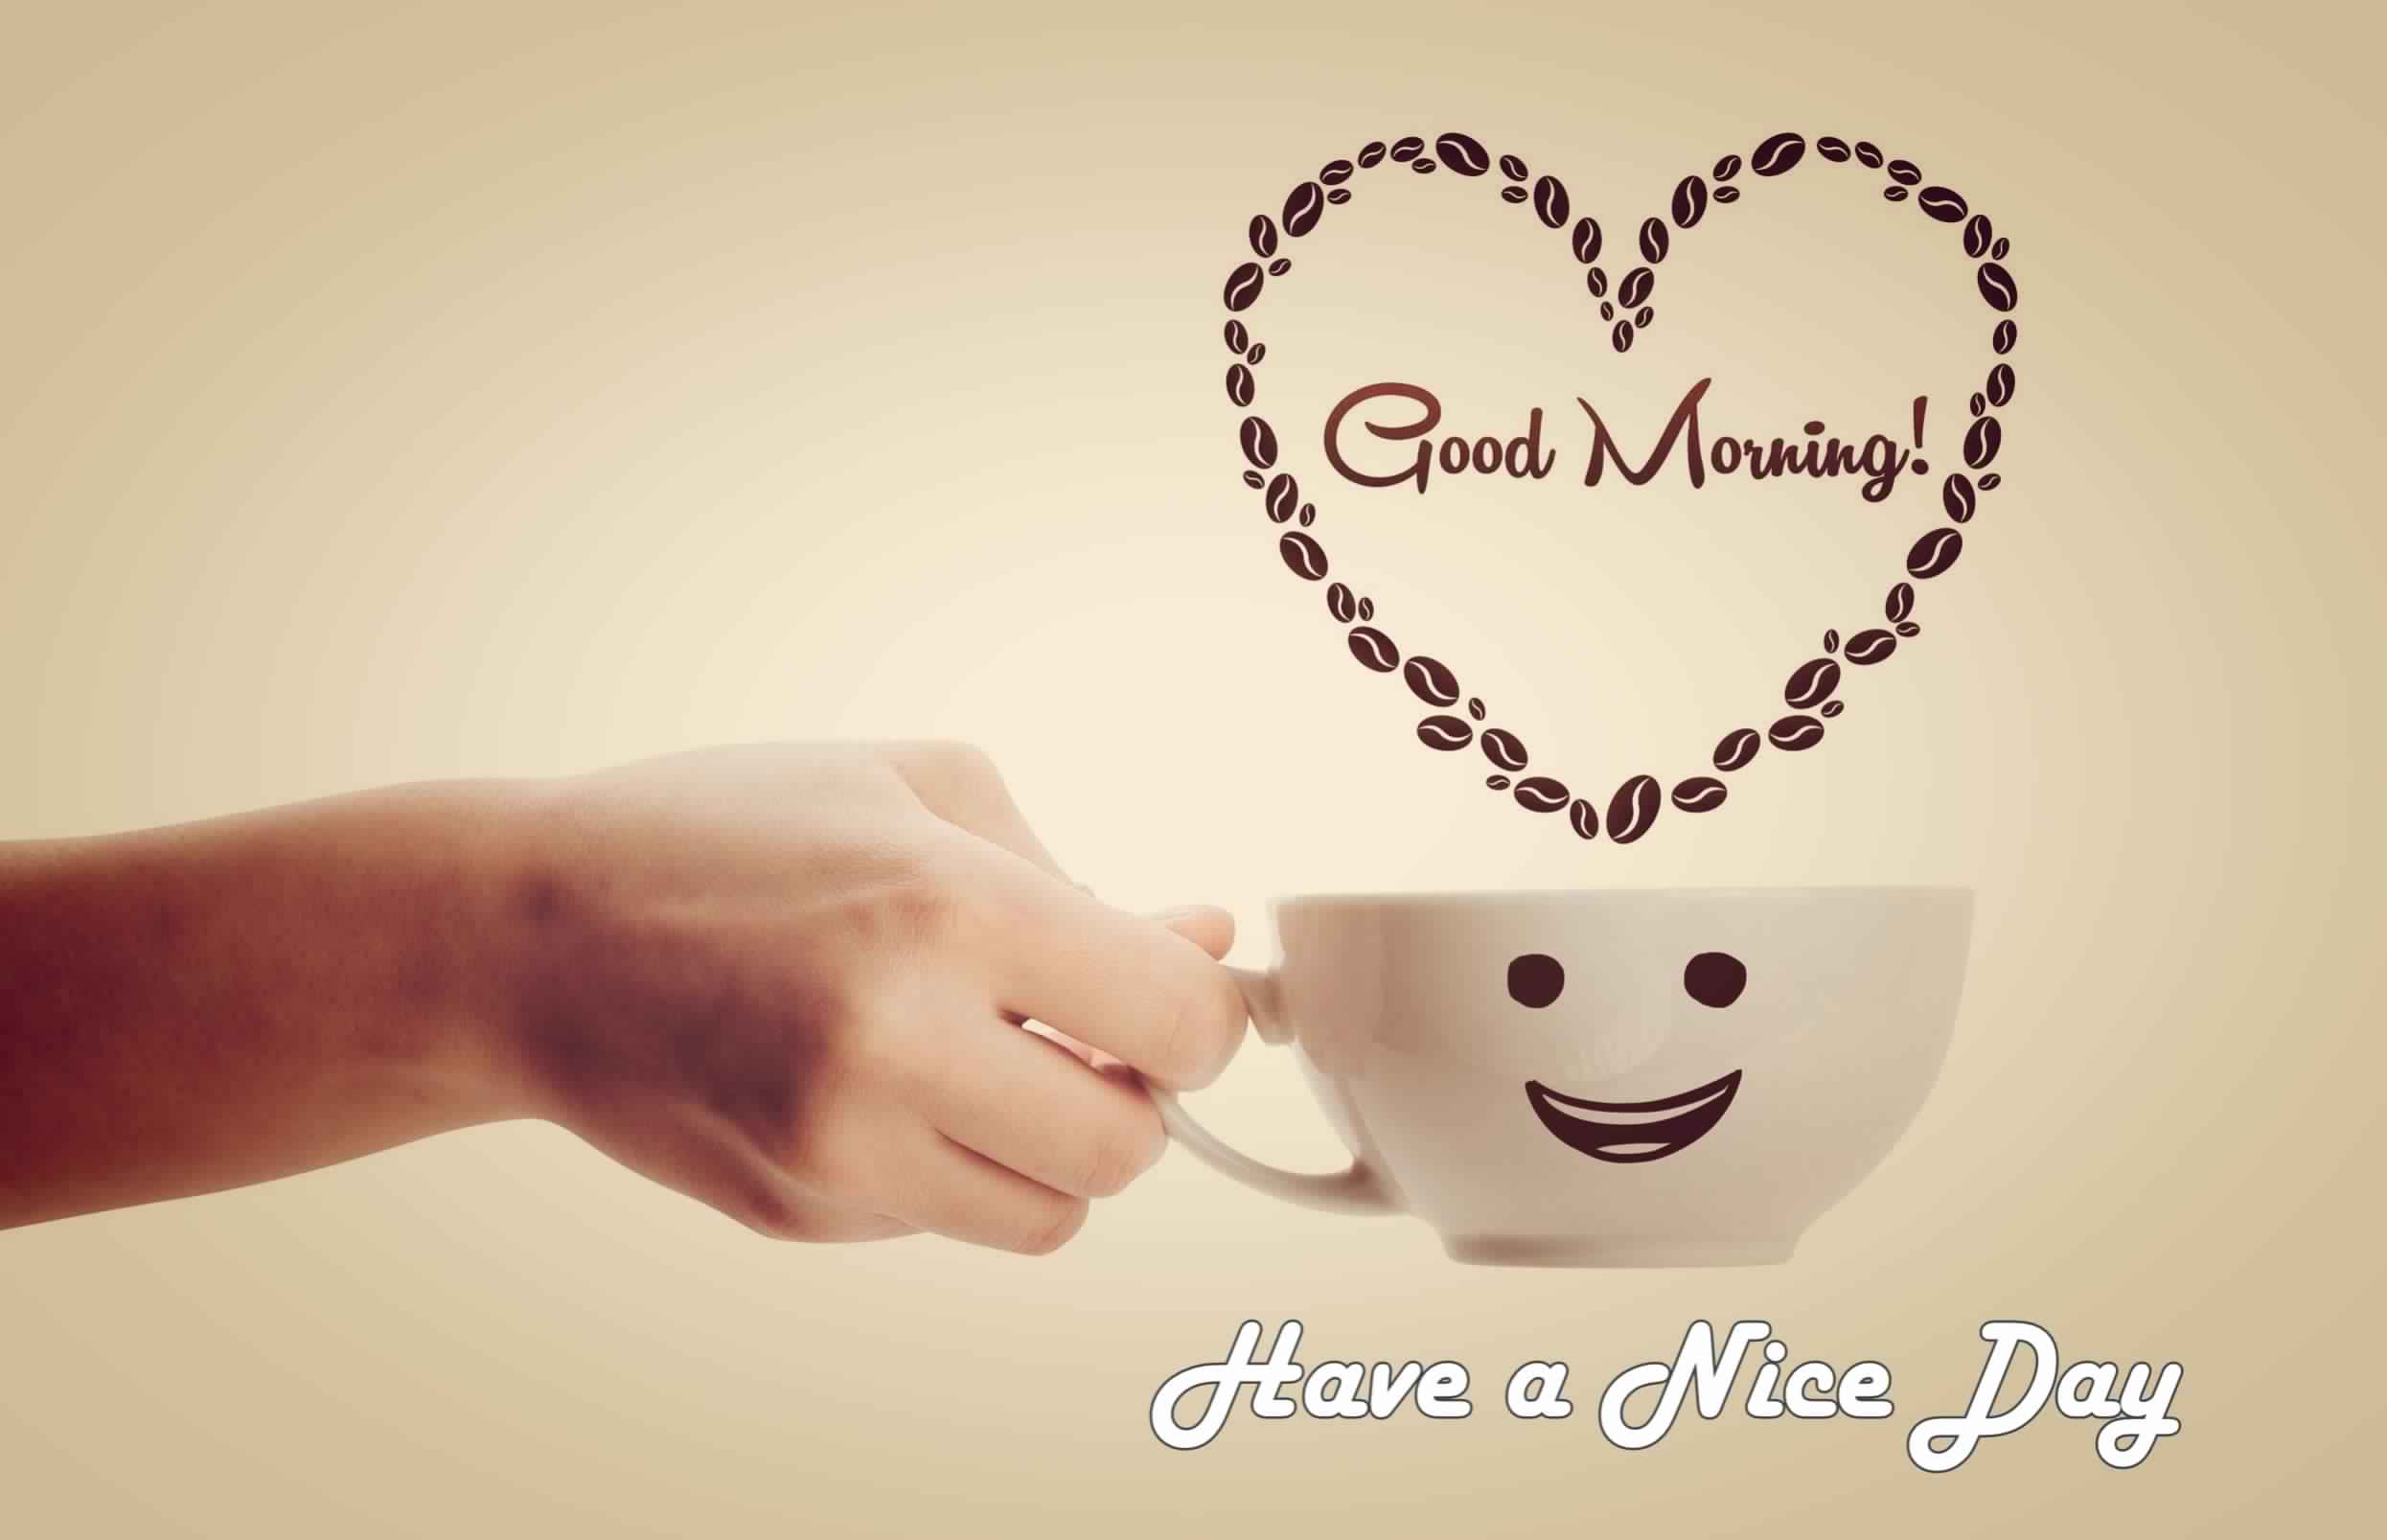 Sms Good Morning Messages Romantic Pictures - Beautiful Wallpaper Good Morning - HD Wallpaper 